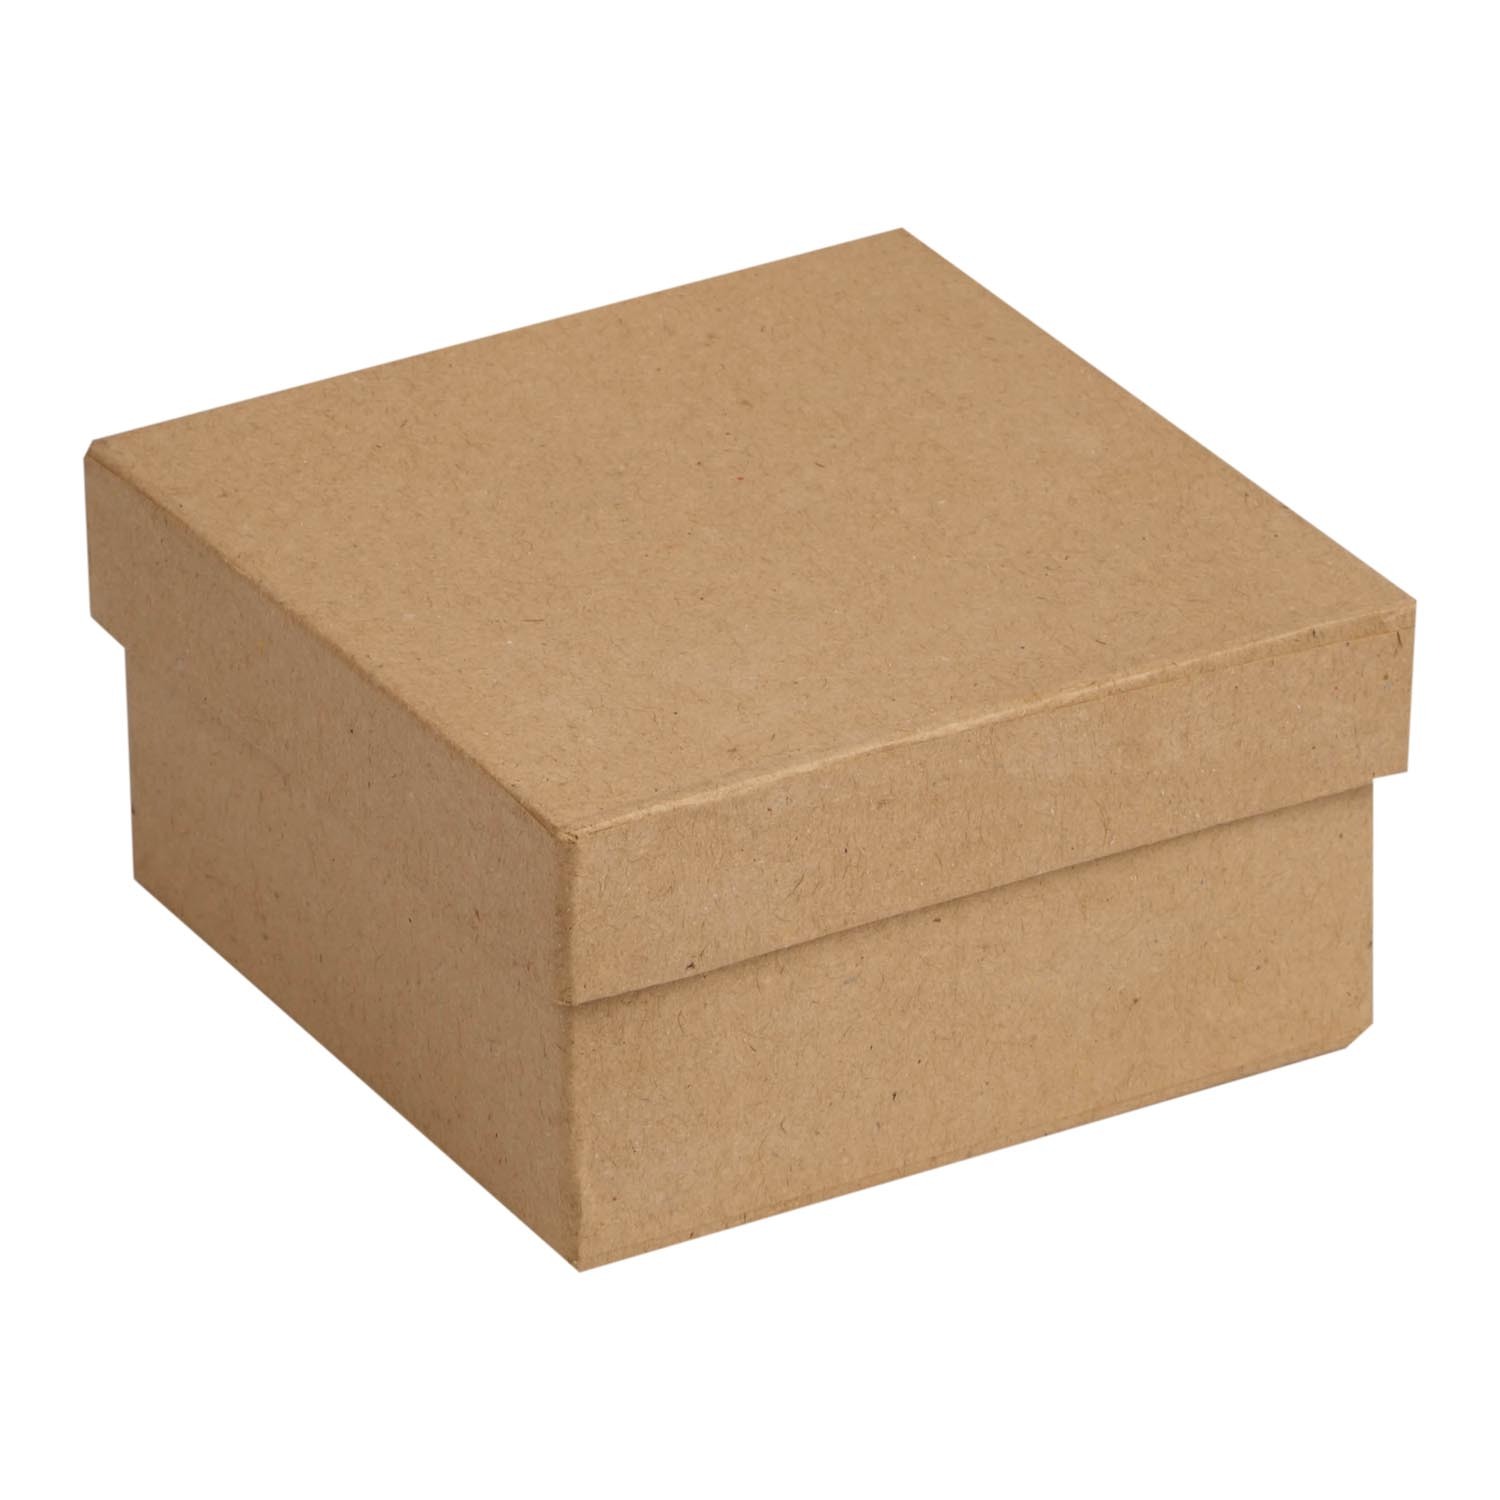 Single Papier Mache Box in Assorted styles Image 2